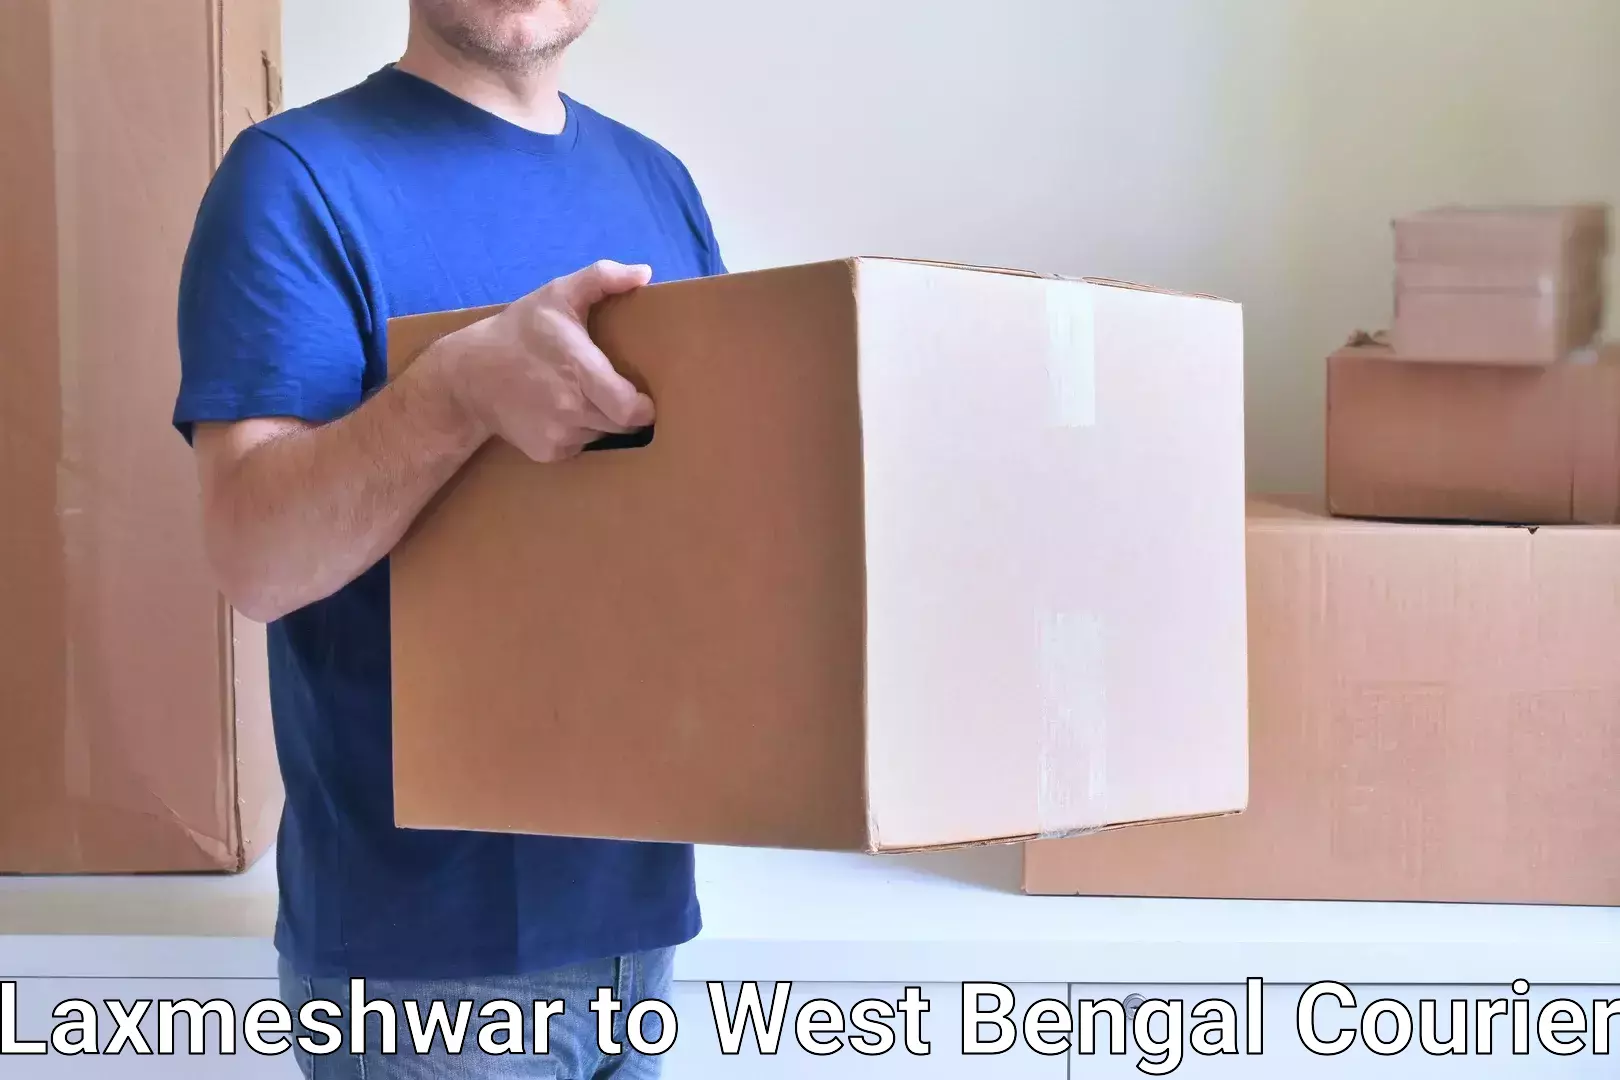 Lightweight parcel options Laxmeshwar to North 24 Parganas